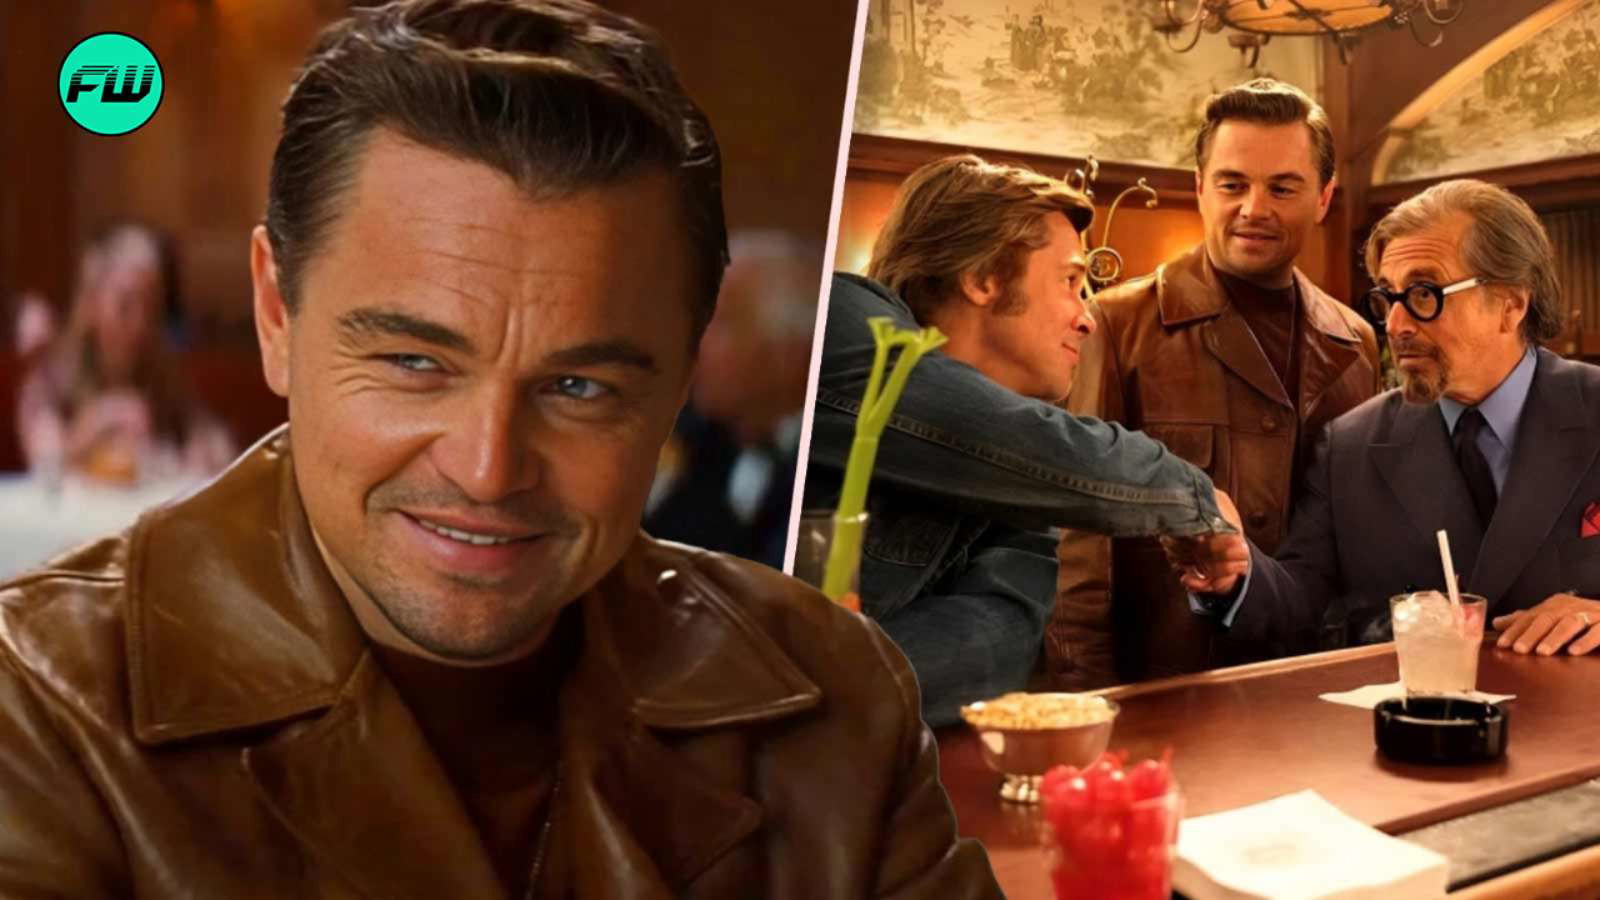 Leonardo DiCaprio Once Upon a Time in Hollywood